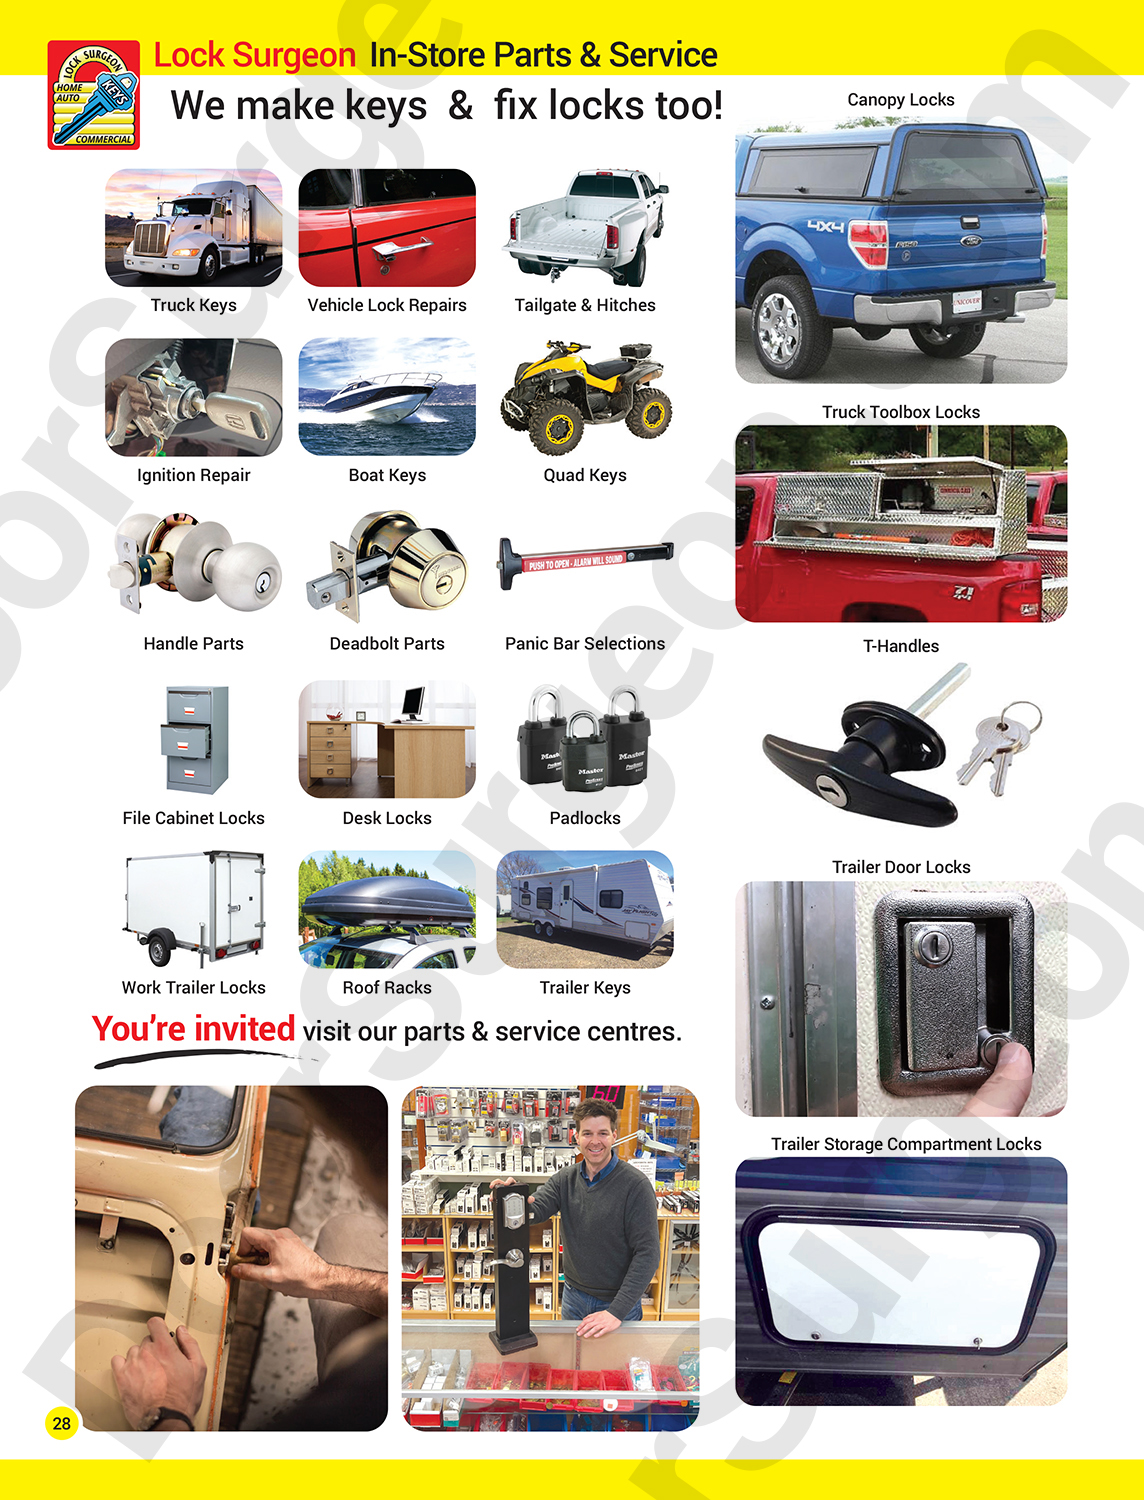 Door Surgeon parts and service centres make keys, fix locks tailgates & hitches ignition repairs.